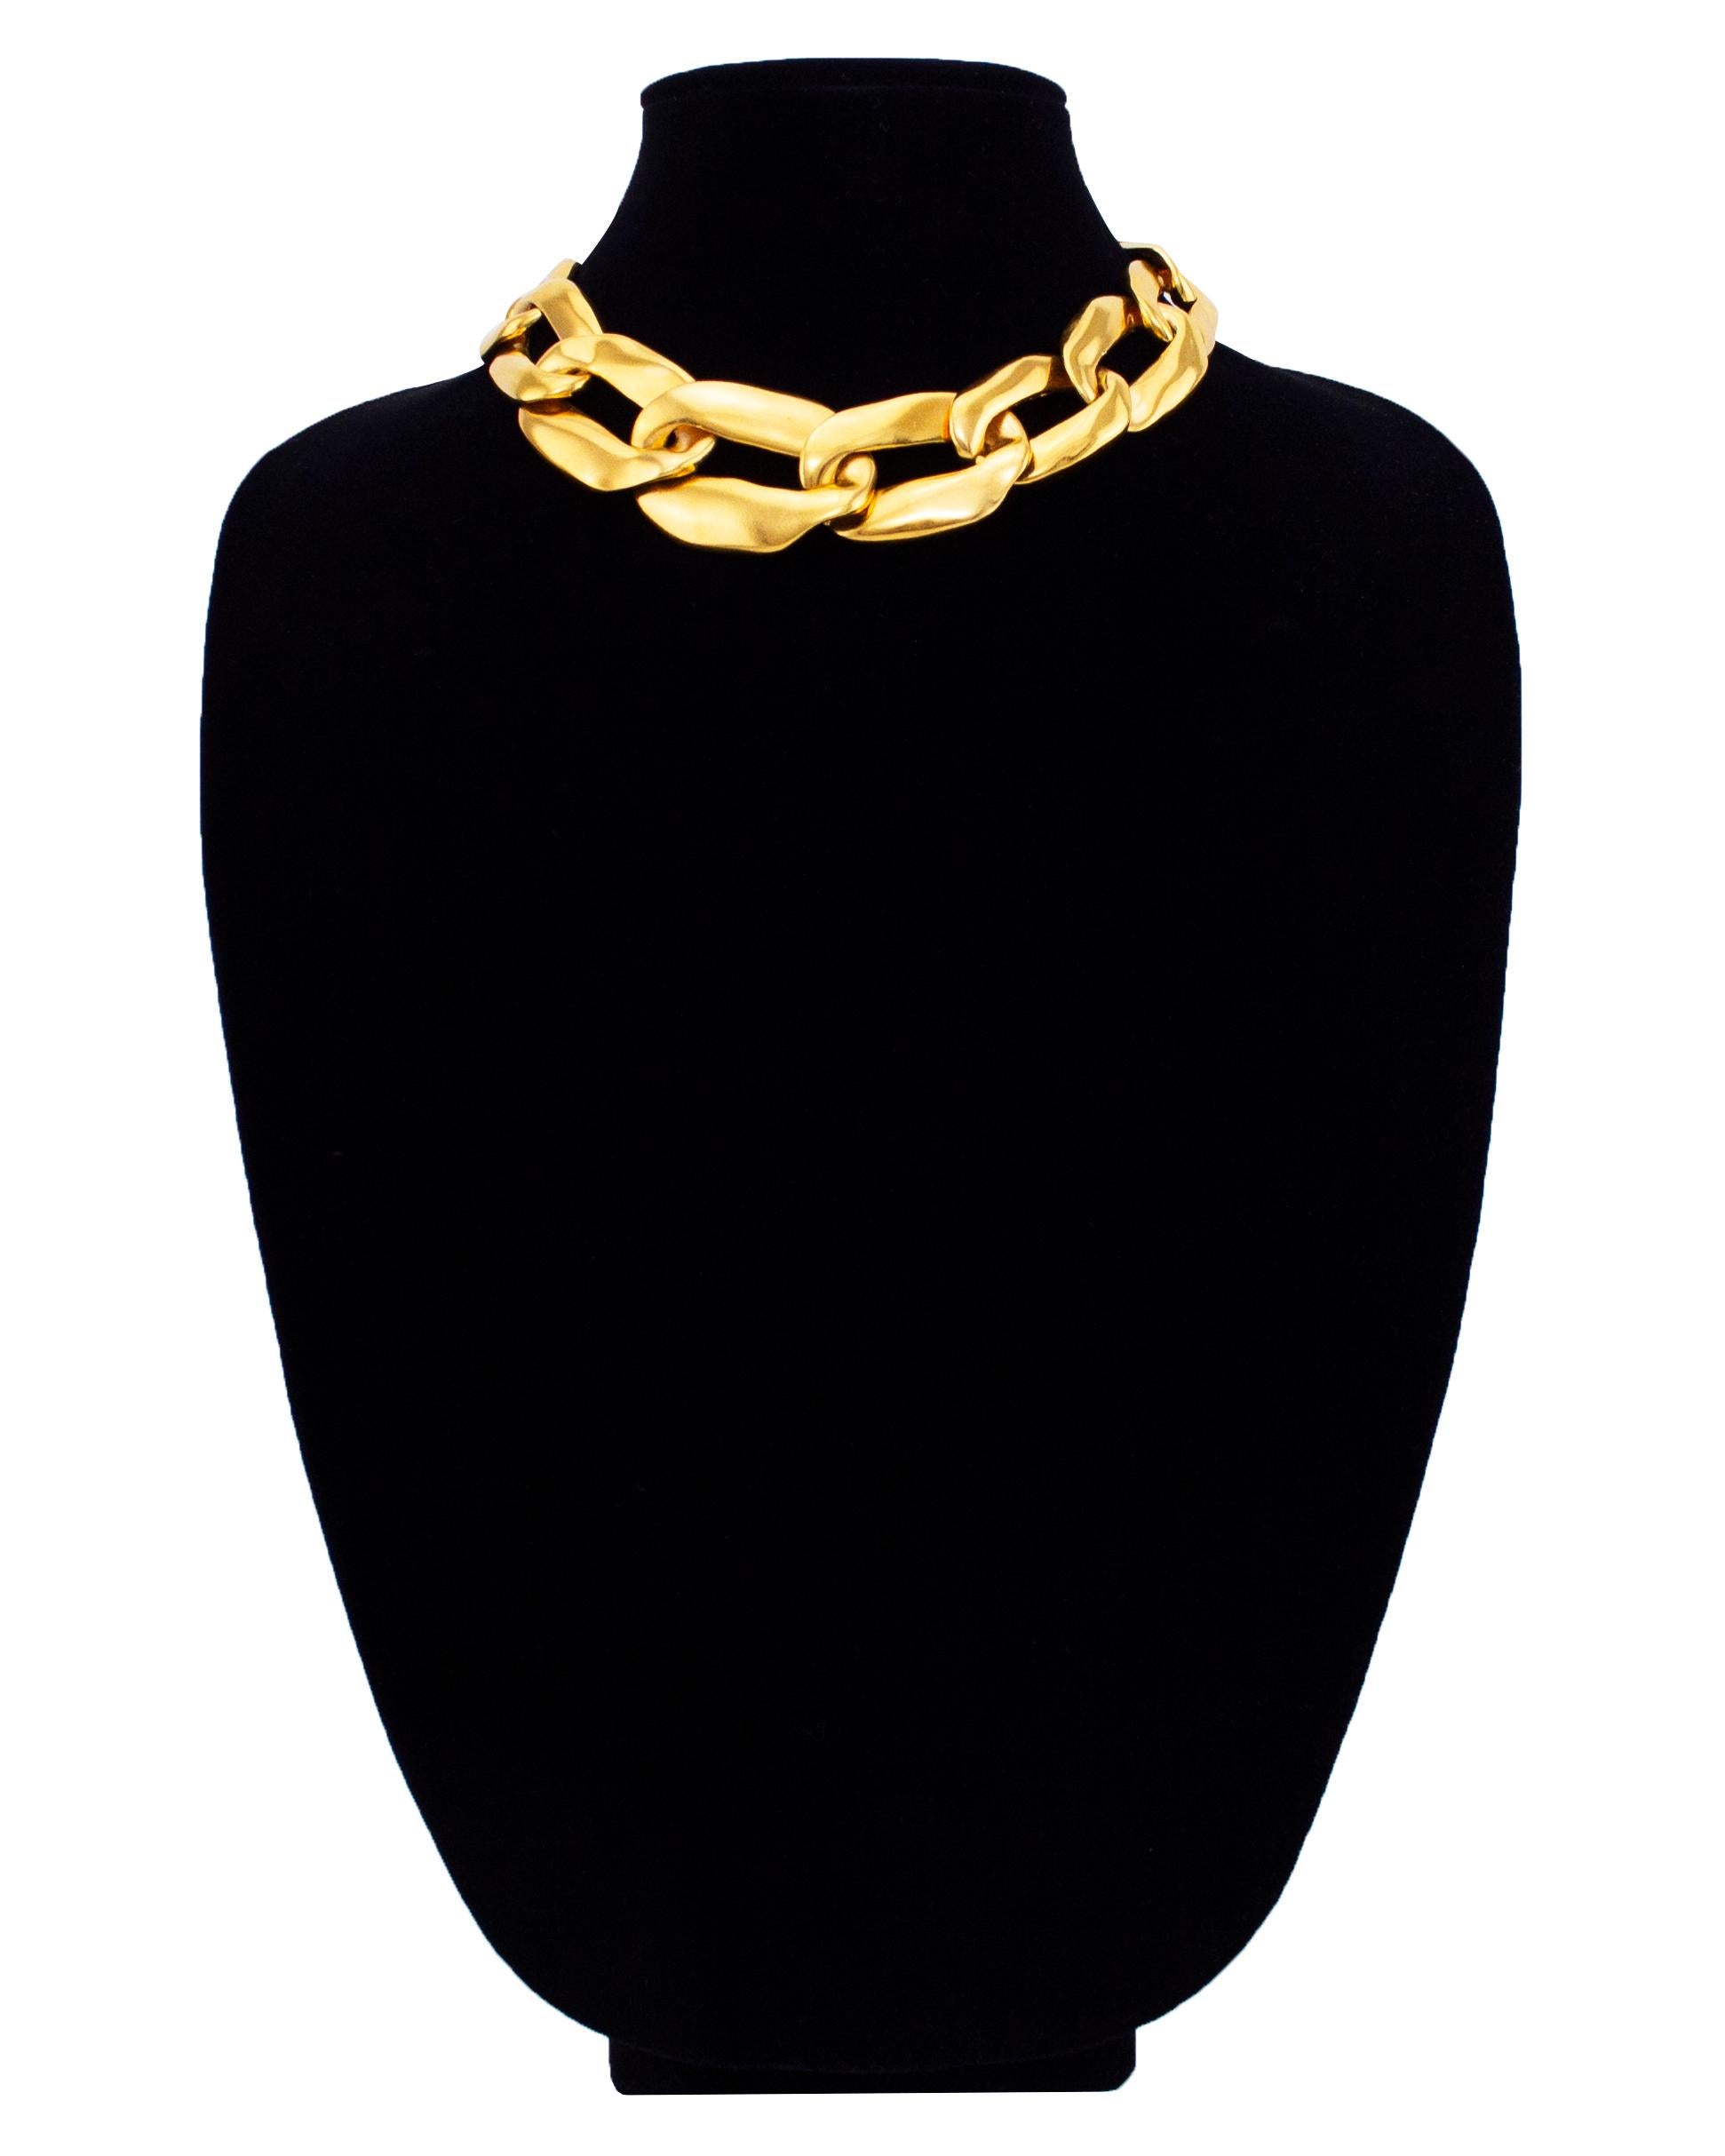 Mid 1980's YSL gilt metal oversized graduated chain link necklace. Adjustable at the back to fit loose or choker style. This is a classic piece of fashion jewelry that Yves Saint Laurent repeated every decade with slight variations. This version has